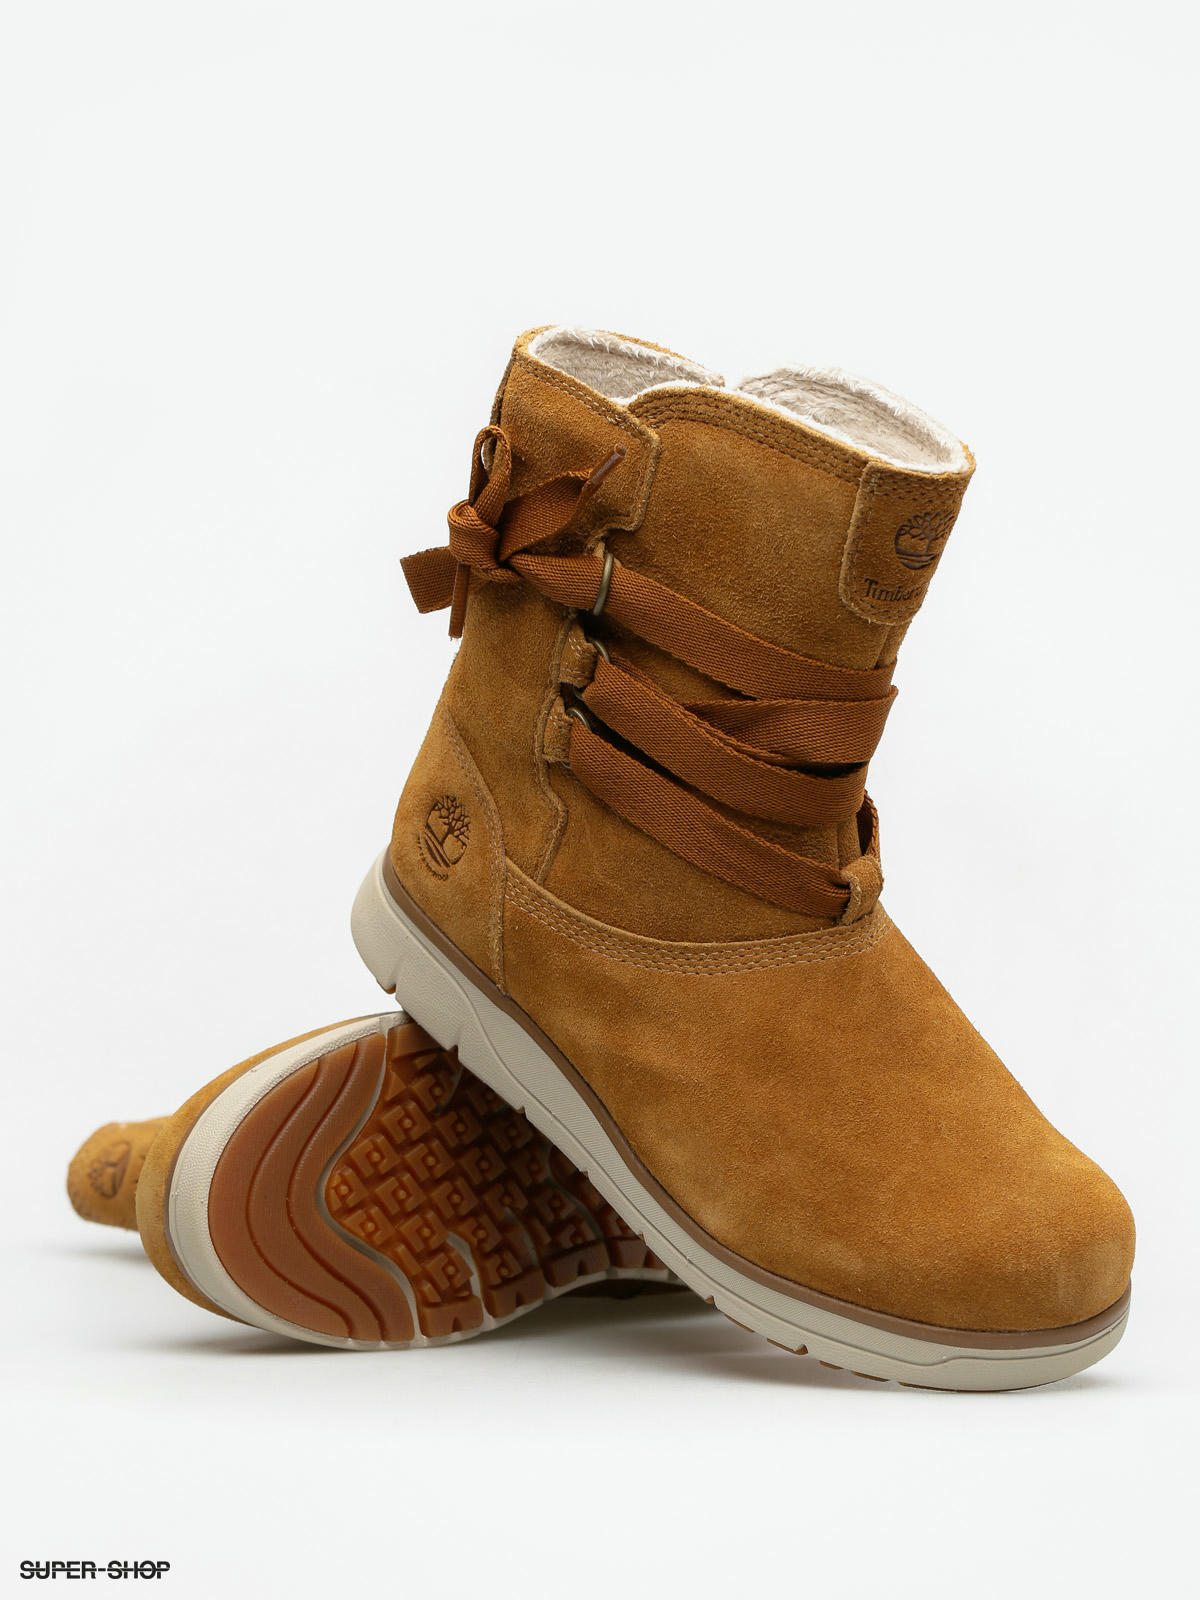 leighland leather winter boot for women in tan